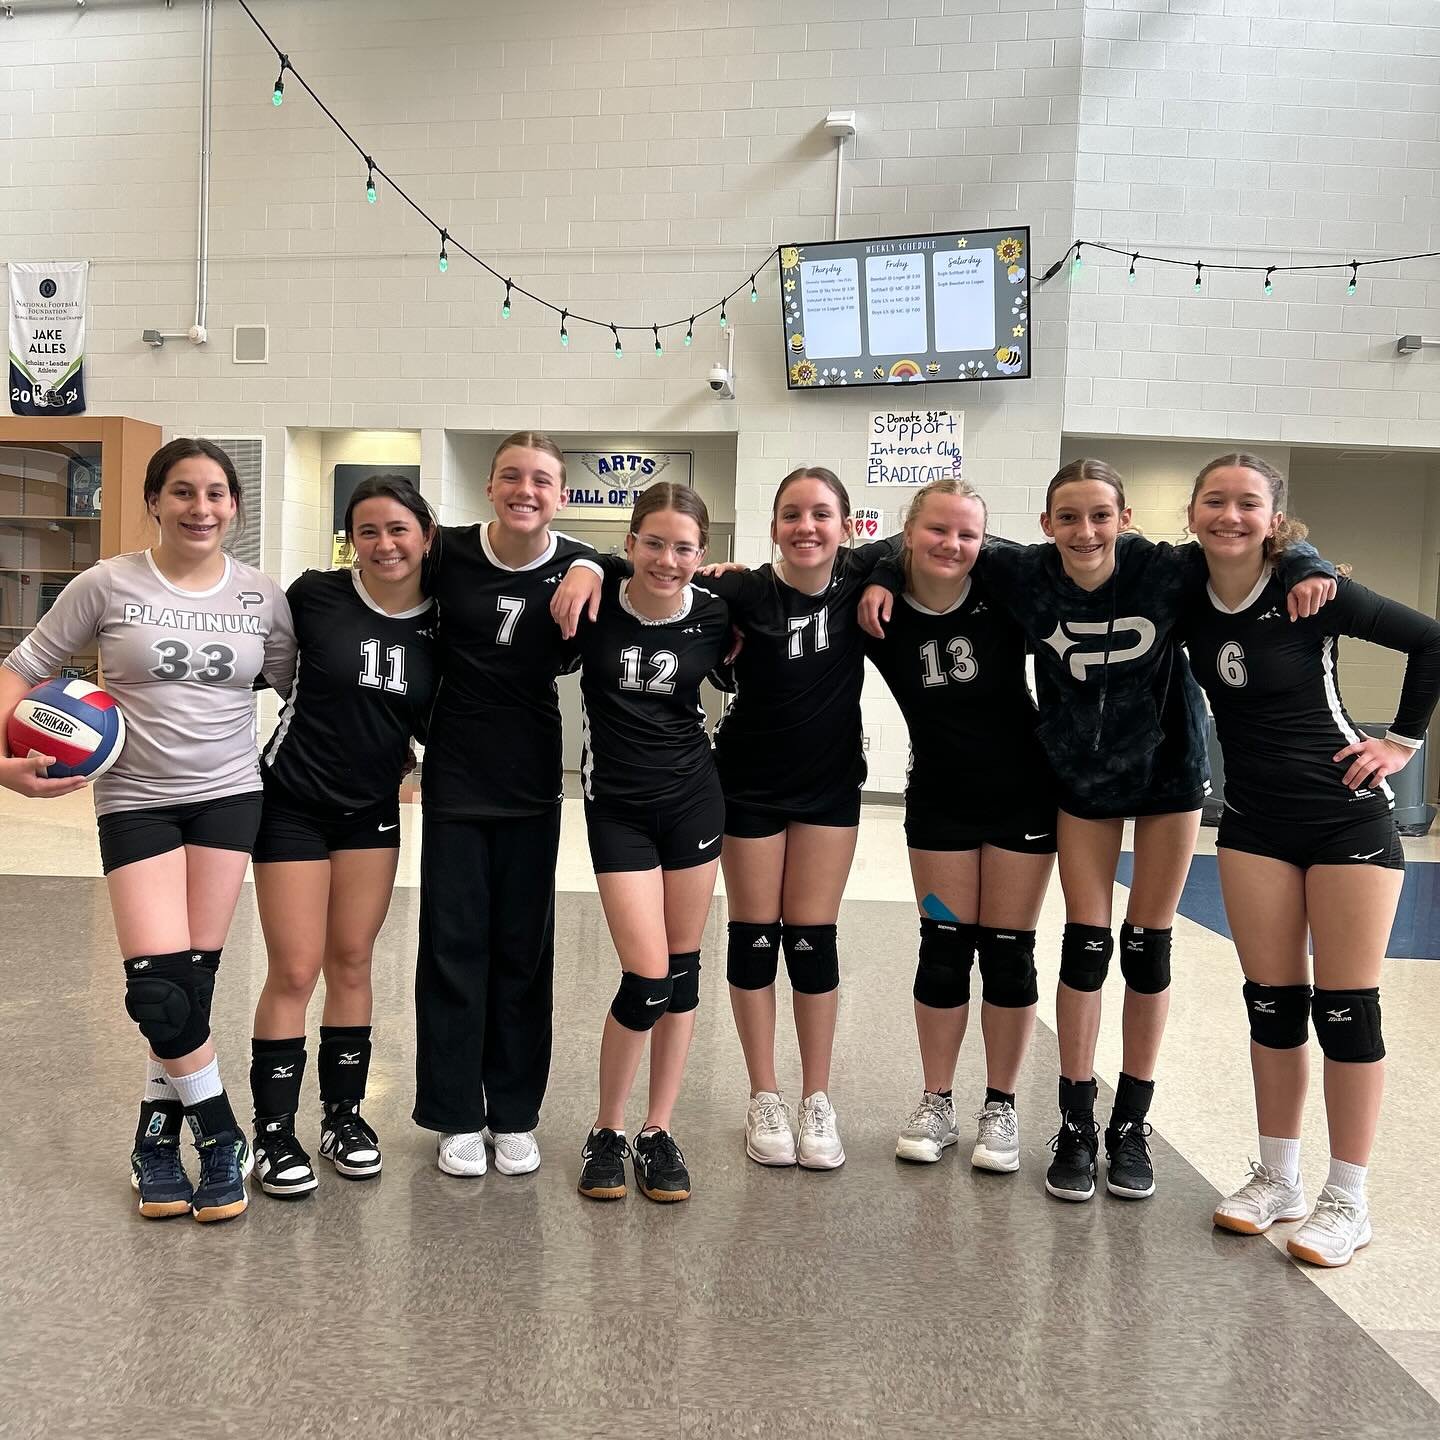 Our 14U Apex and Summit teams played in the MPV Invitational up in Logan this weekend!  Way to go girls!!! 🖤🏐🤍
.
.
.
.
.
.
#platinumvolleyball #platinumvolleyballclub #jointheforge #aauvolleyball #clubvolleyball #clubvolleyballseason #utahclubvoll